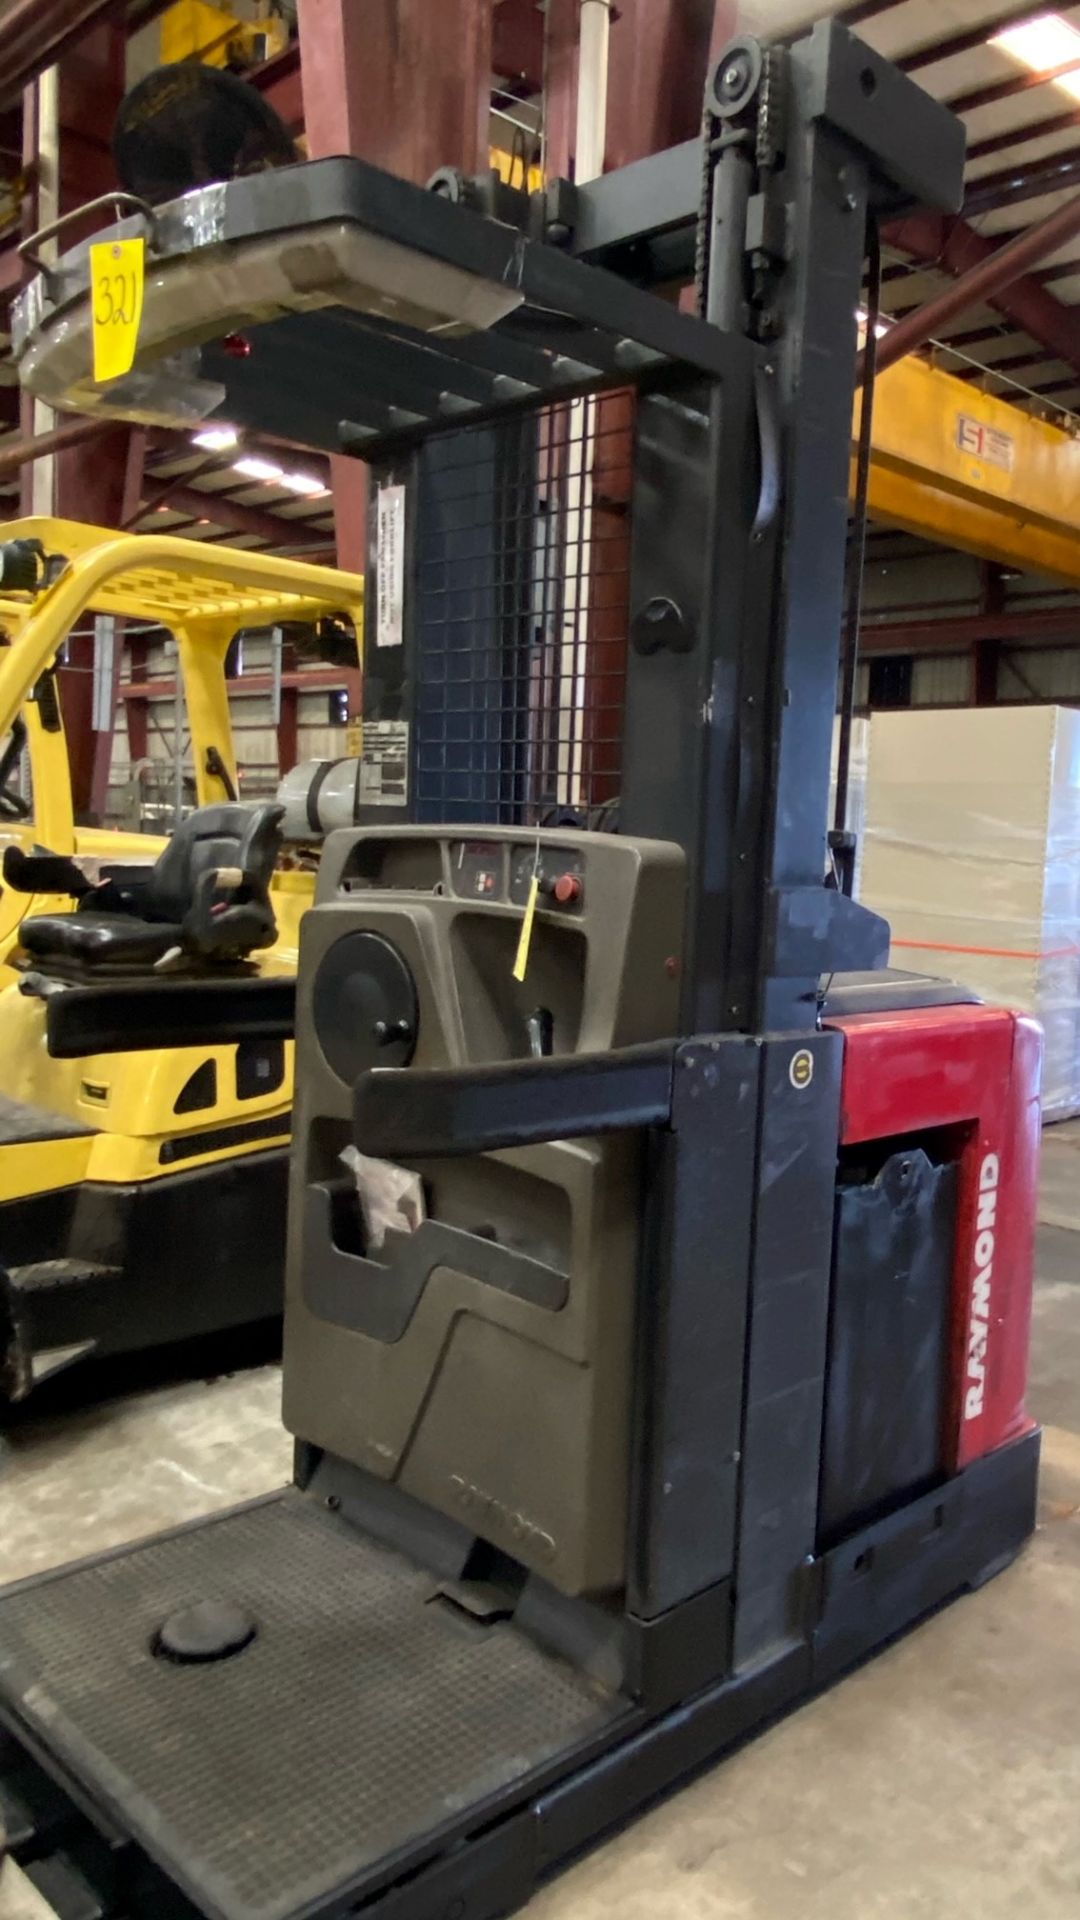 ELECTRIC FORKLIFT, RAYMOND 3000 LB. BASE CAP. MDL. 560-OPC30TT, new 2007, 36 v. electric w/charger, - Image 4 of 10